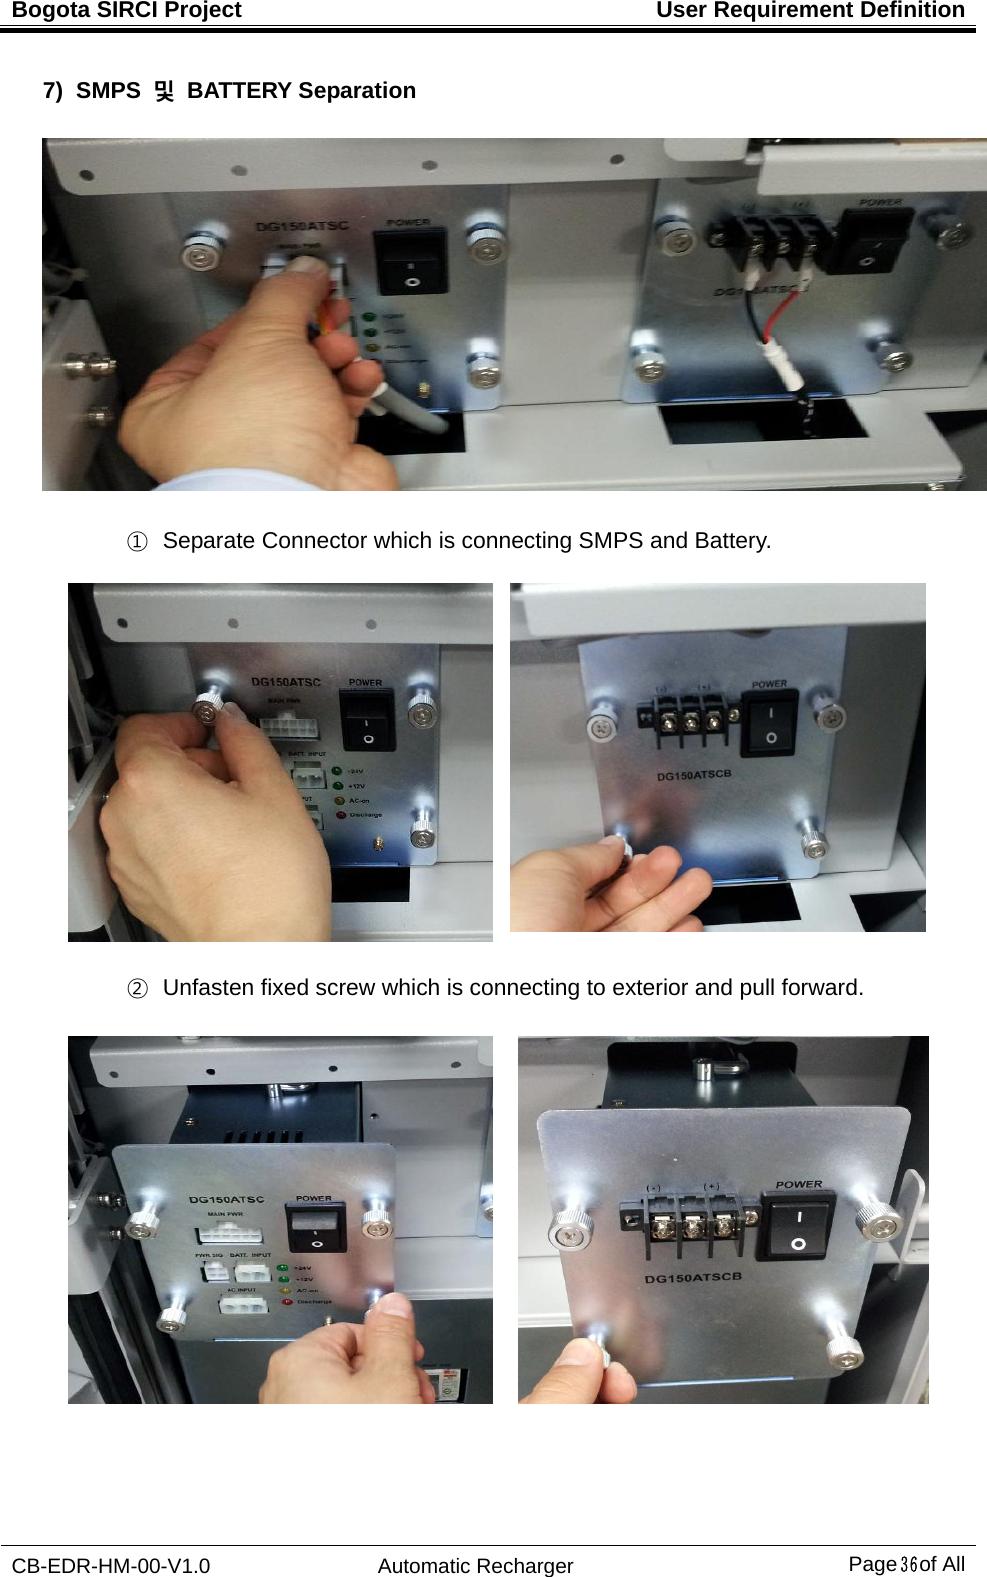 Bogota SIRCI Project  User Requirement Definition CB-EDR-HM-00-V1.0 Automatic Recharger Page３６ of All 7) SMPS 및 BATTERY Separation    ①   Separate Connector which is connecting SMPS and Battery.        ②   Unfasten fixed screw which is connecting to exterior and pull forward.    